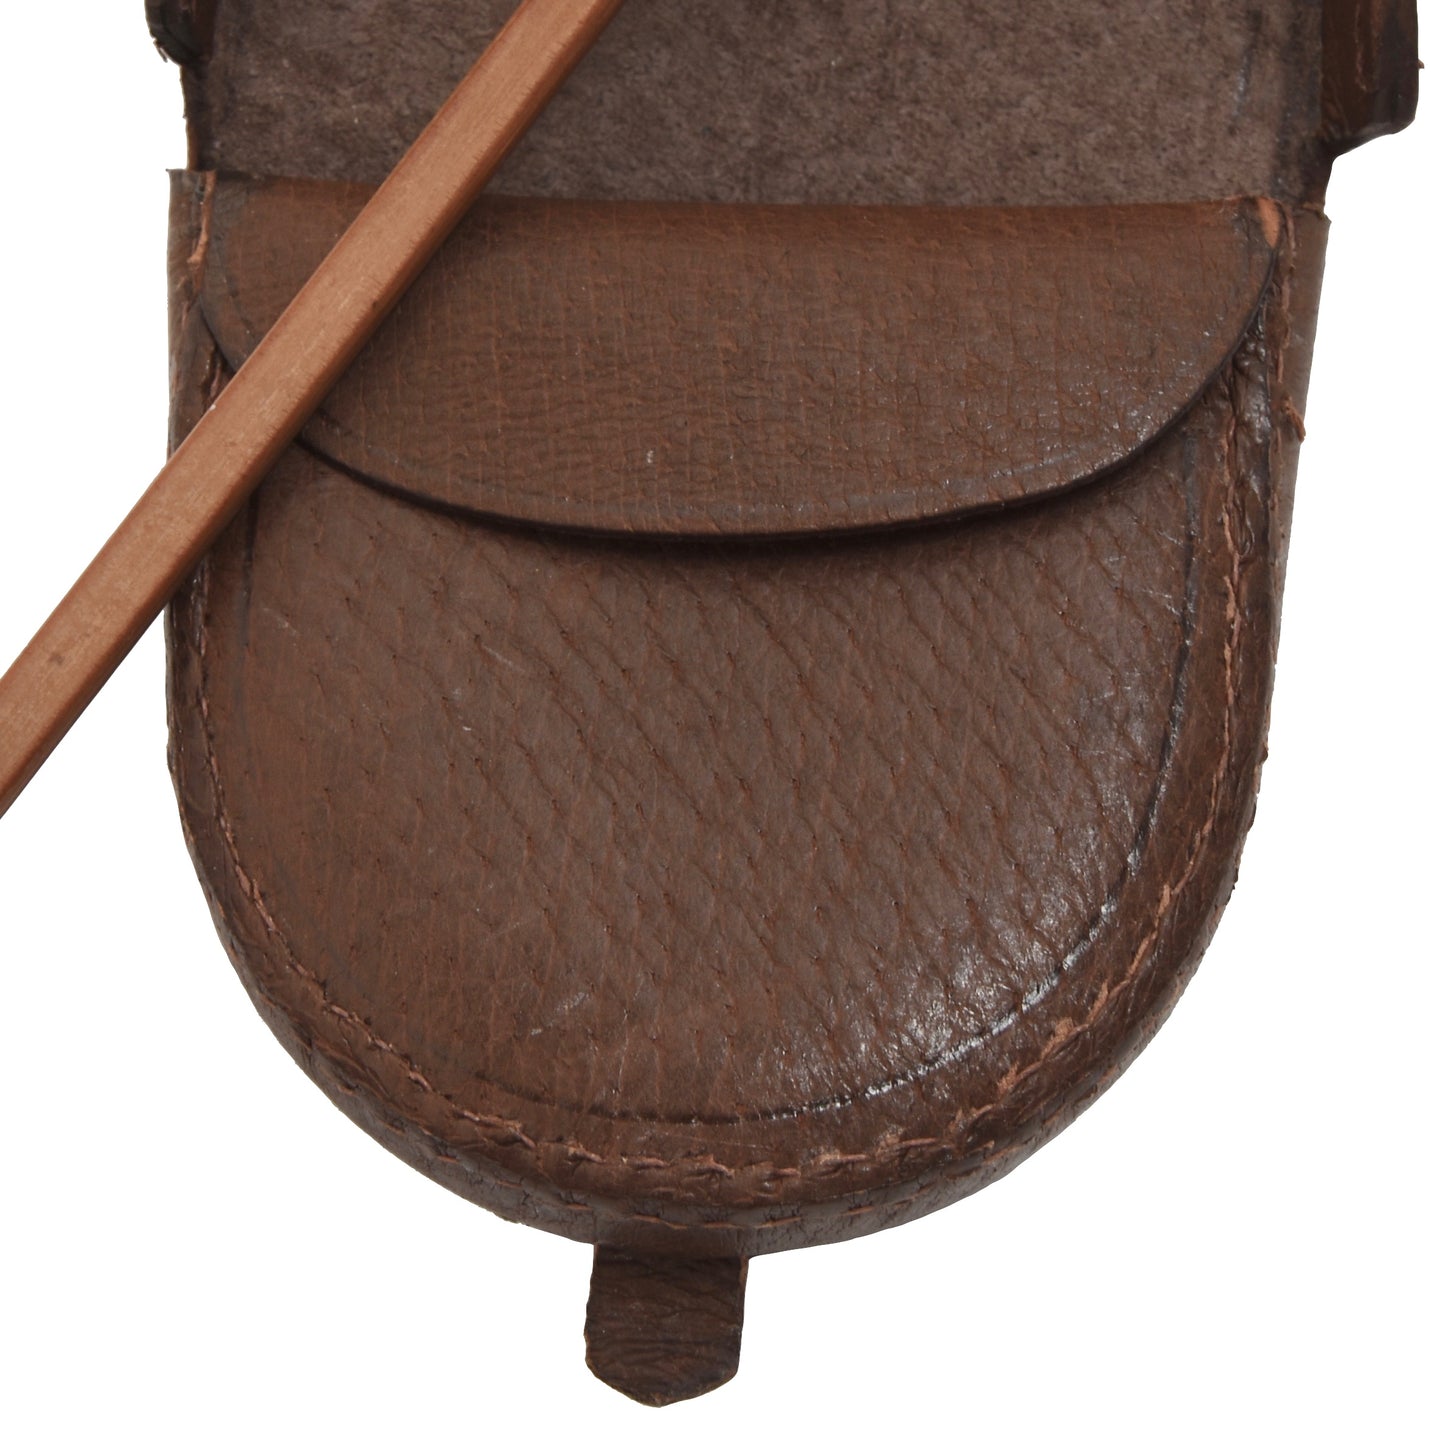 Classic Leather Change Purse - Brown